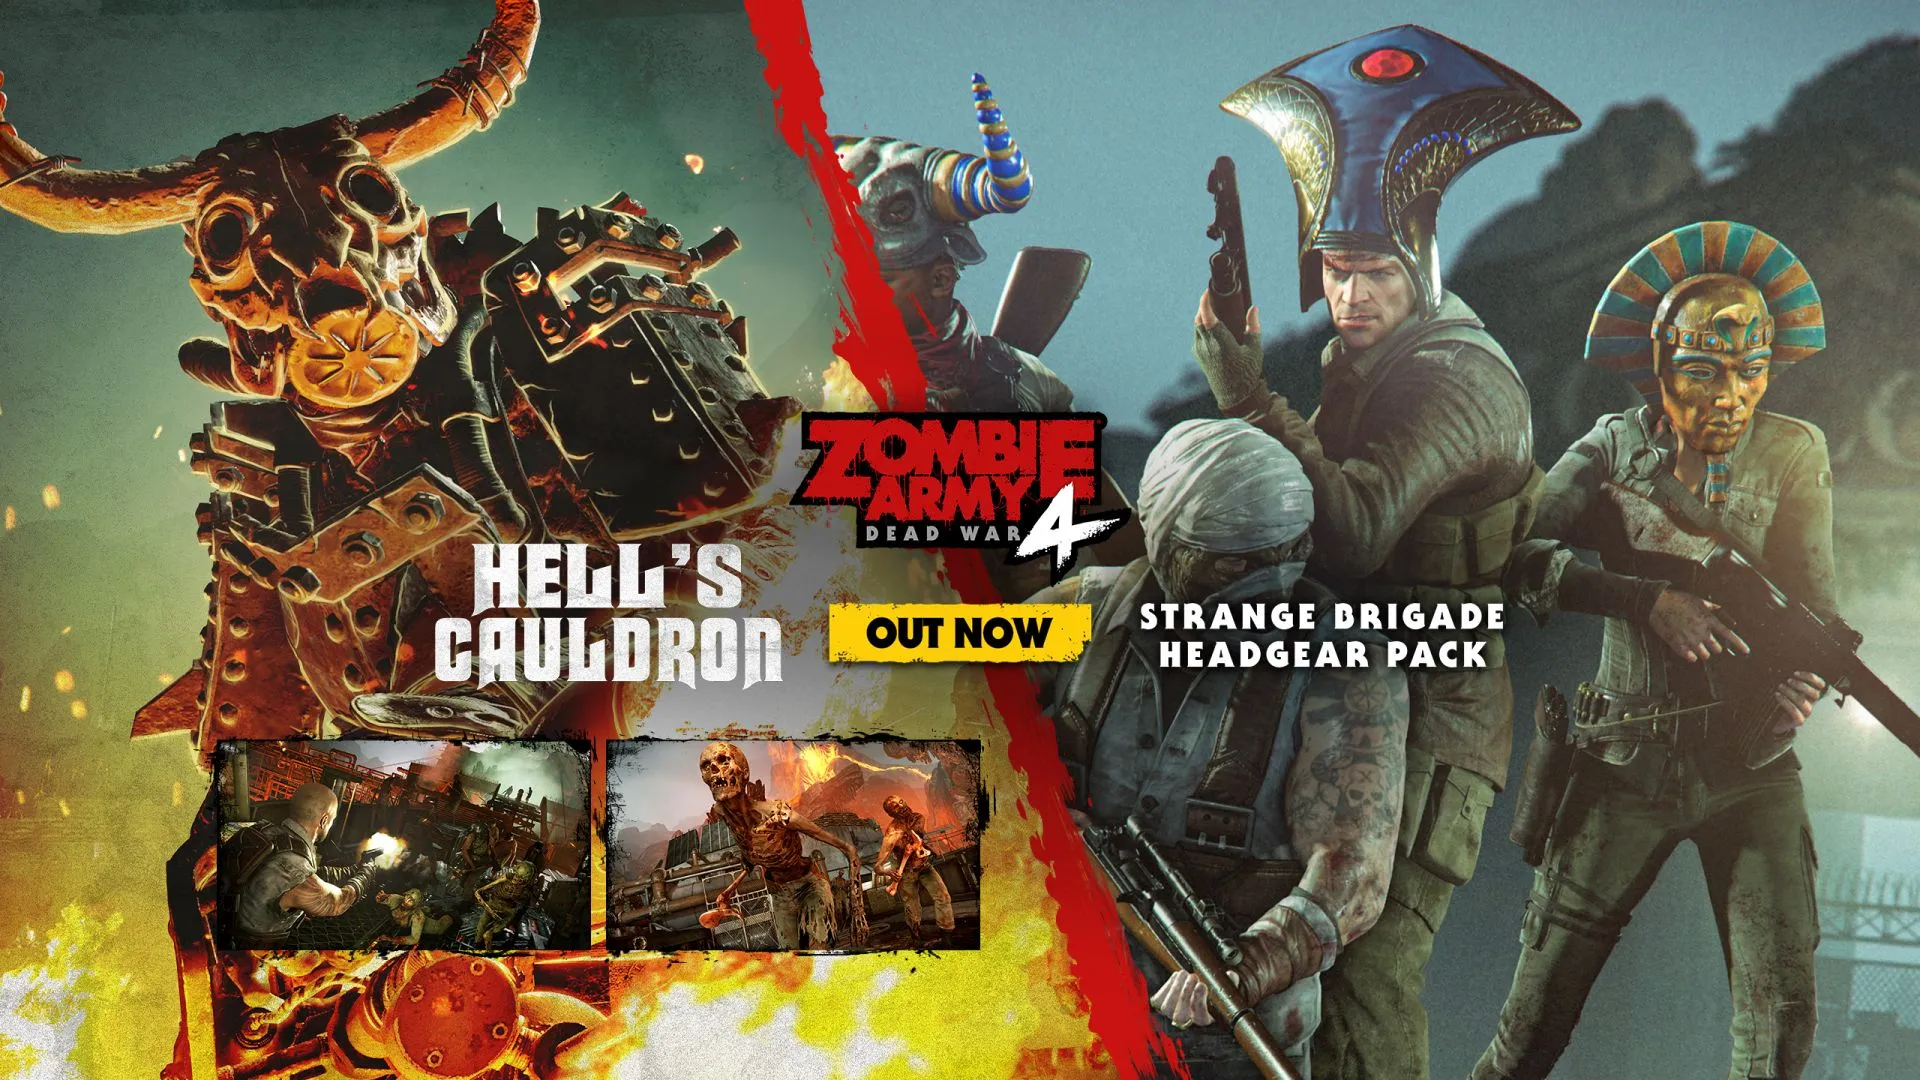 DO YOU HAVE WHAT IT TAKES TO FIGHT IN HELL’S CAULDRON IN ZOMBIE ARMY 4?